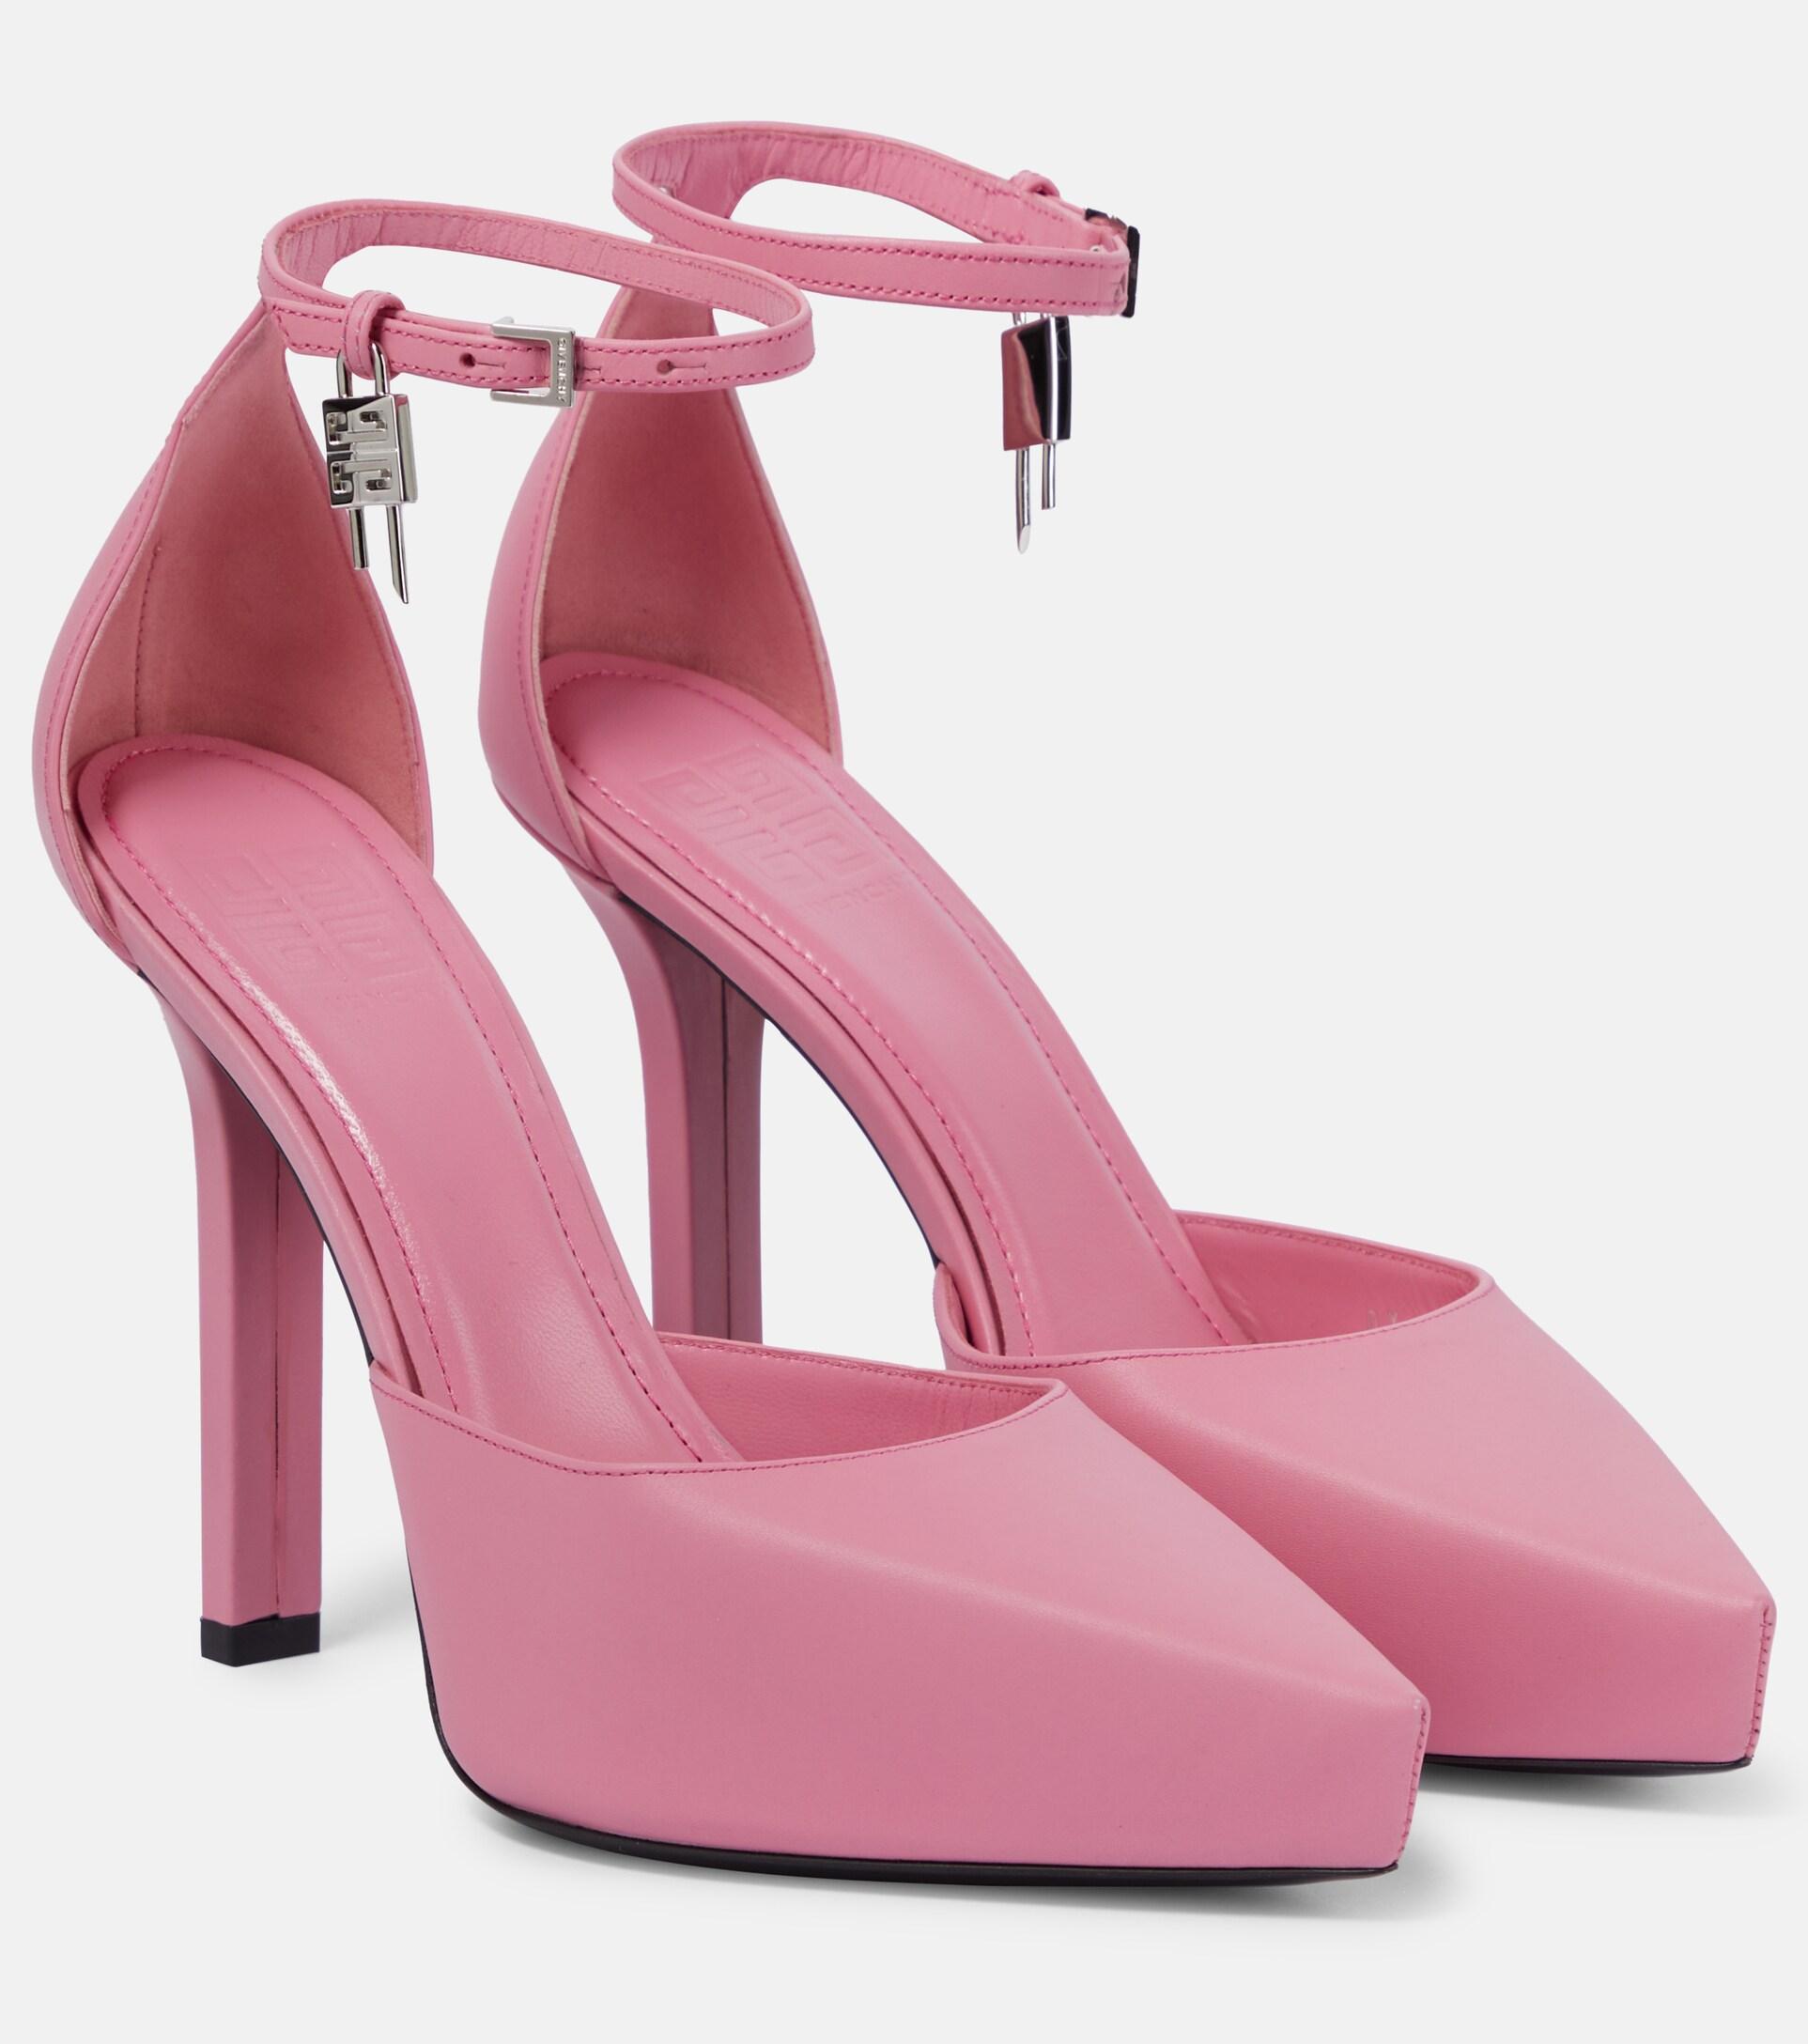 Givenchy G Lock Leather Platform Pumps in Pink | Lyst